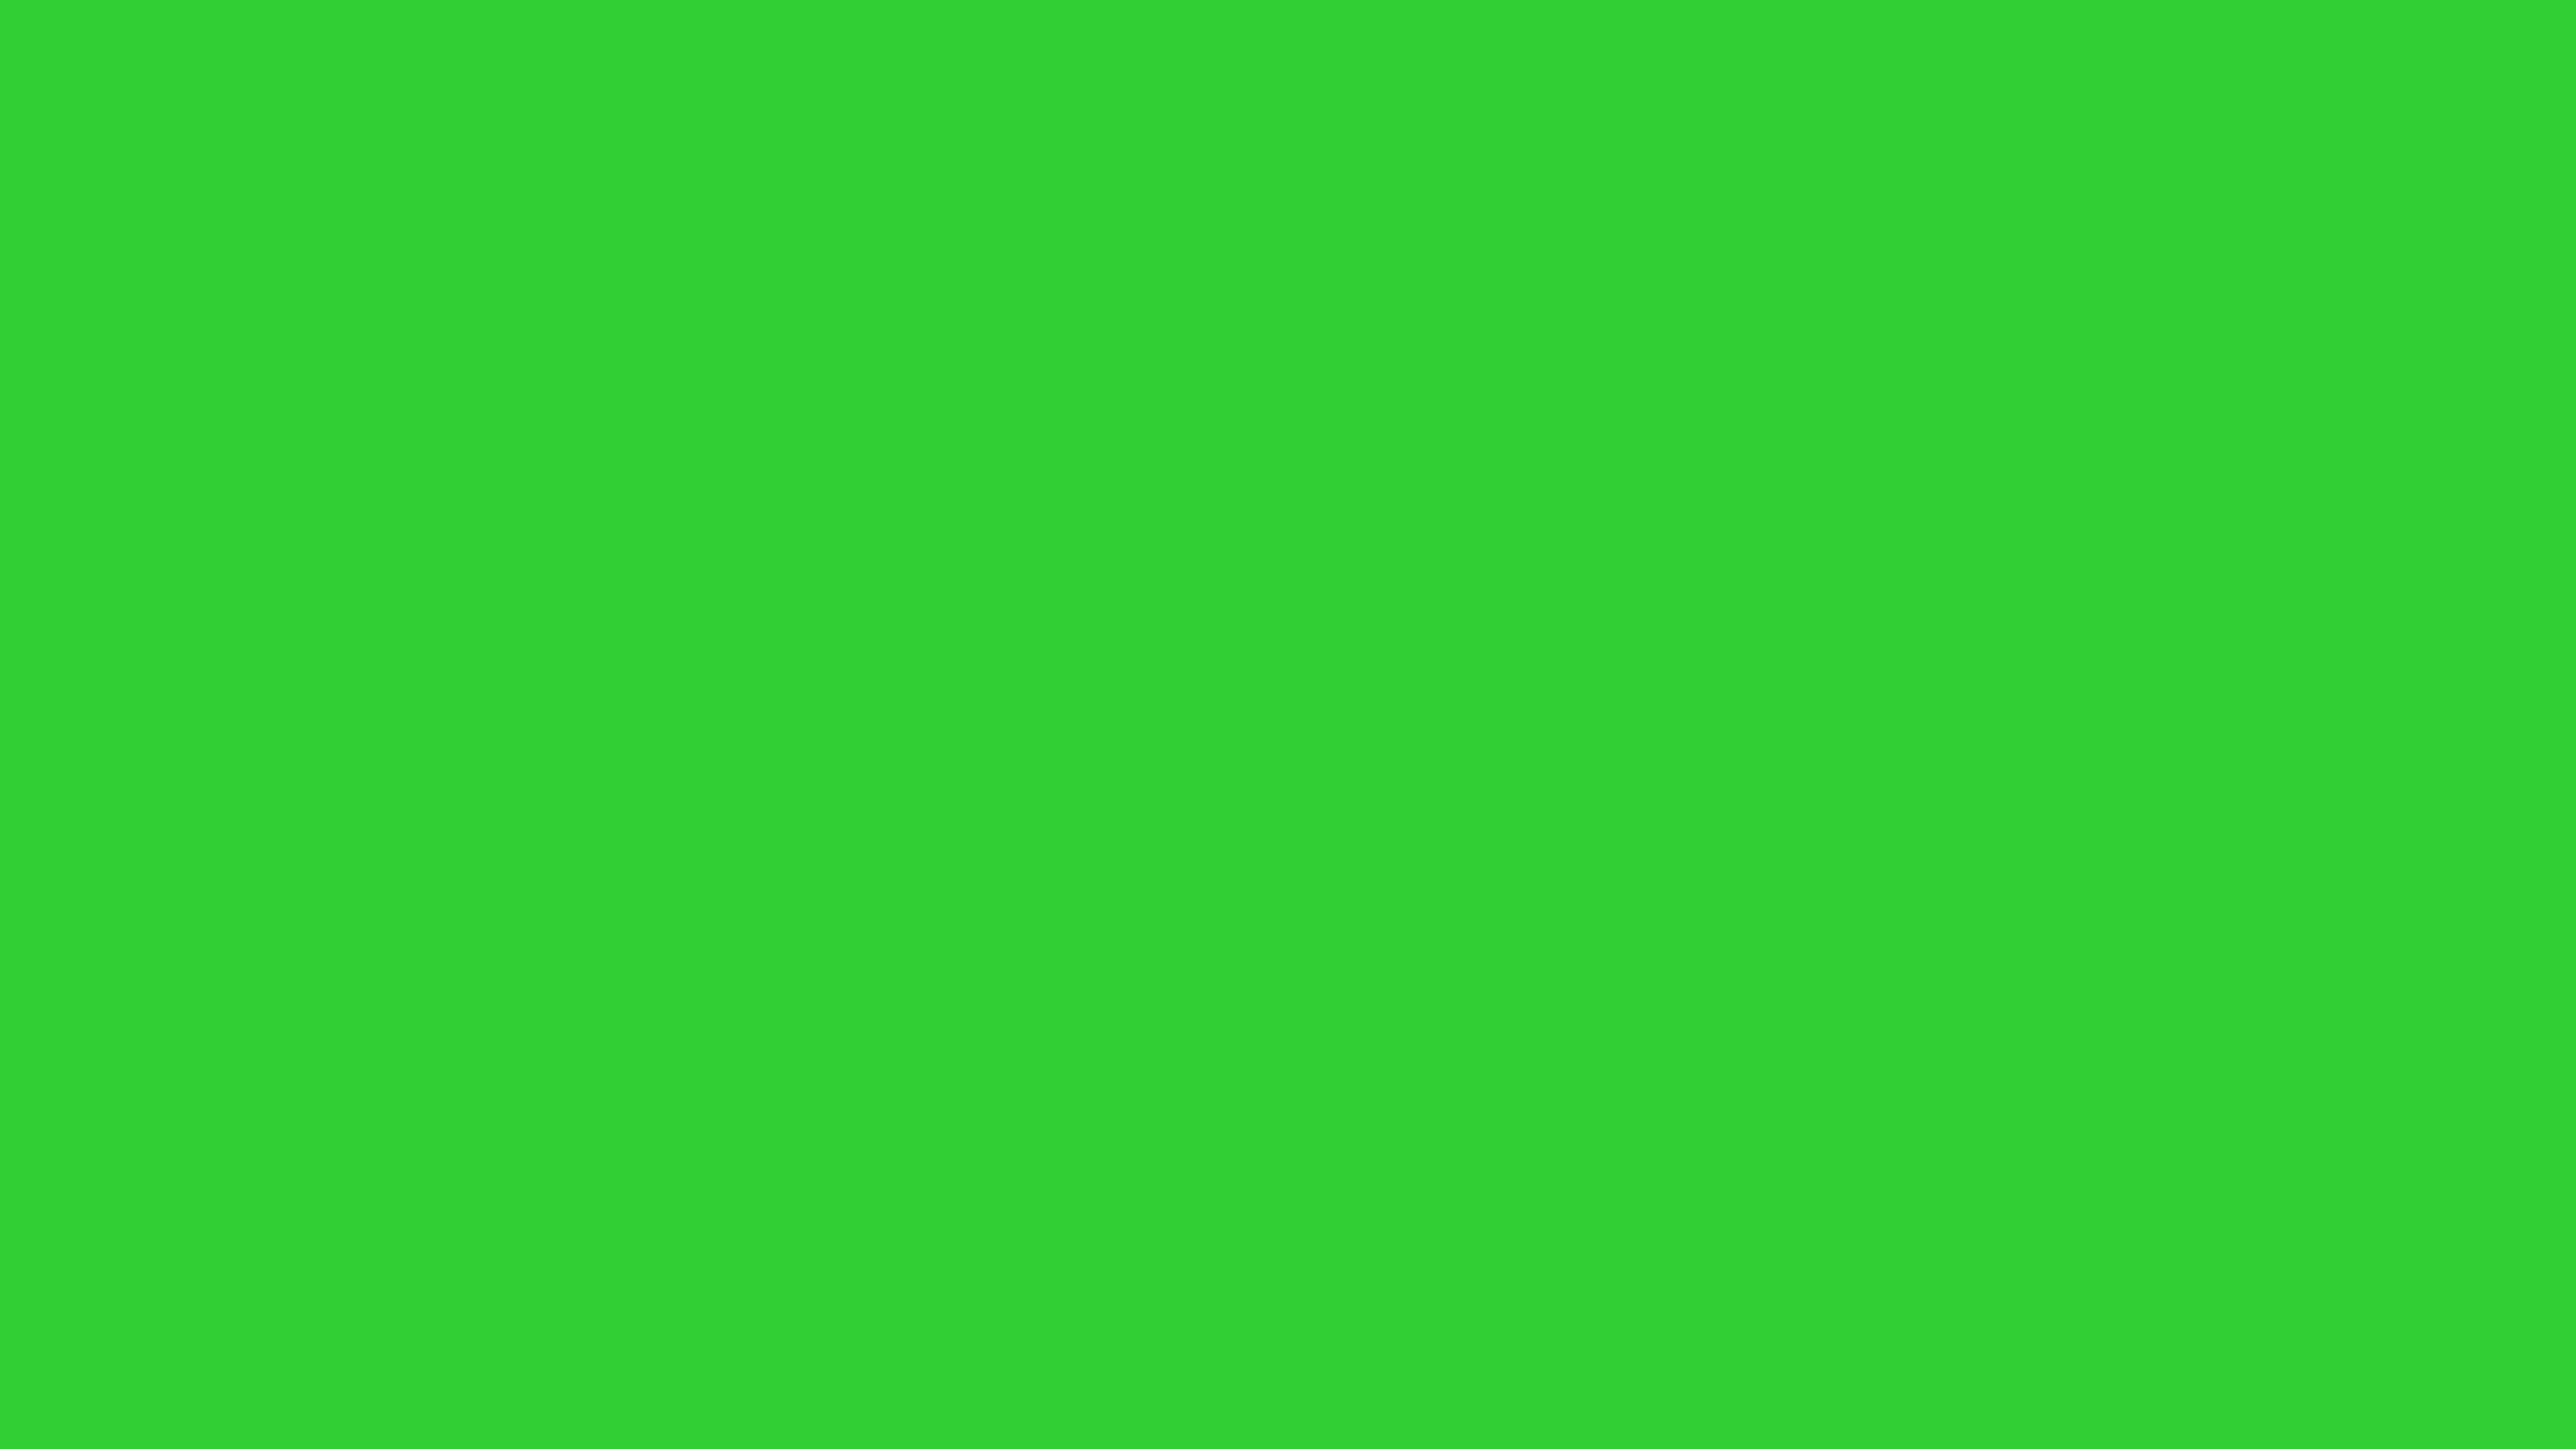 7680x4320 Lime Green Solid Color Background